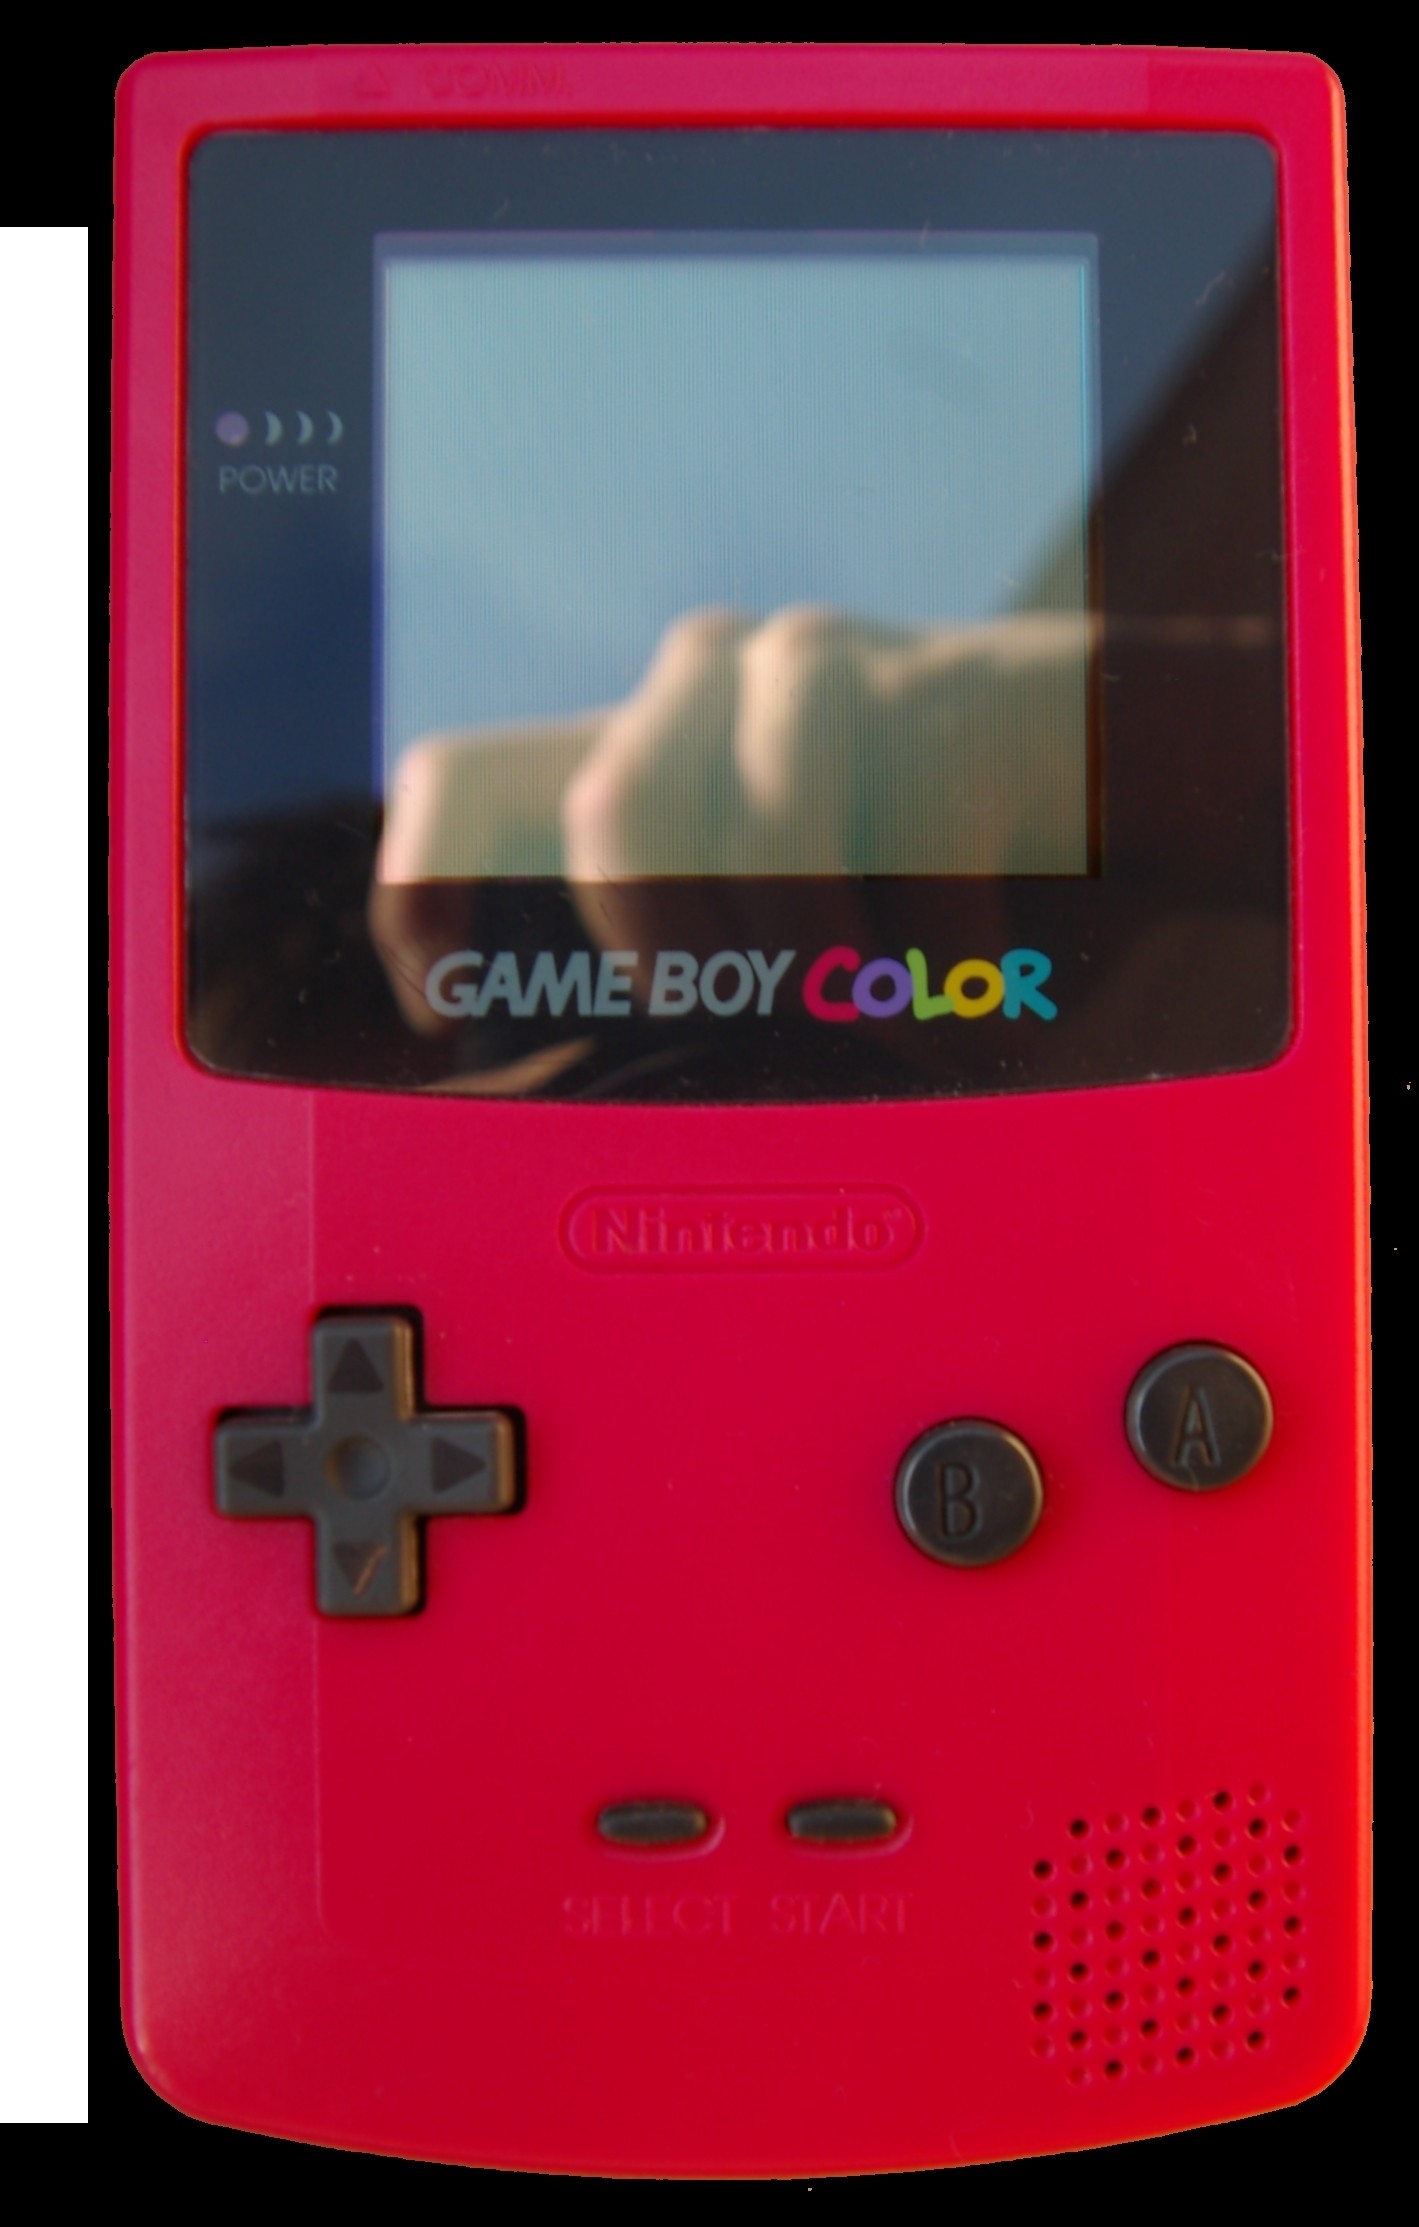 1419x2227 Gameboy images game boy color HD wallpaper and background photos